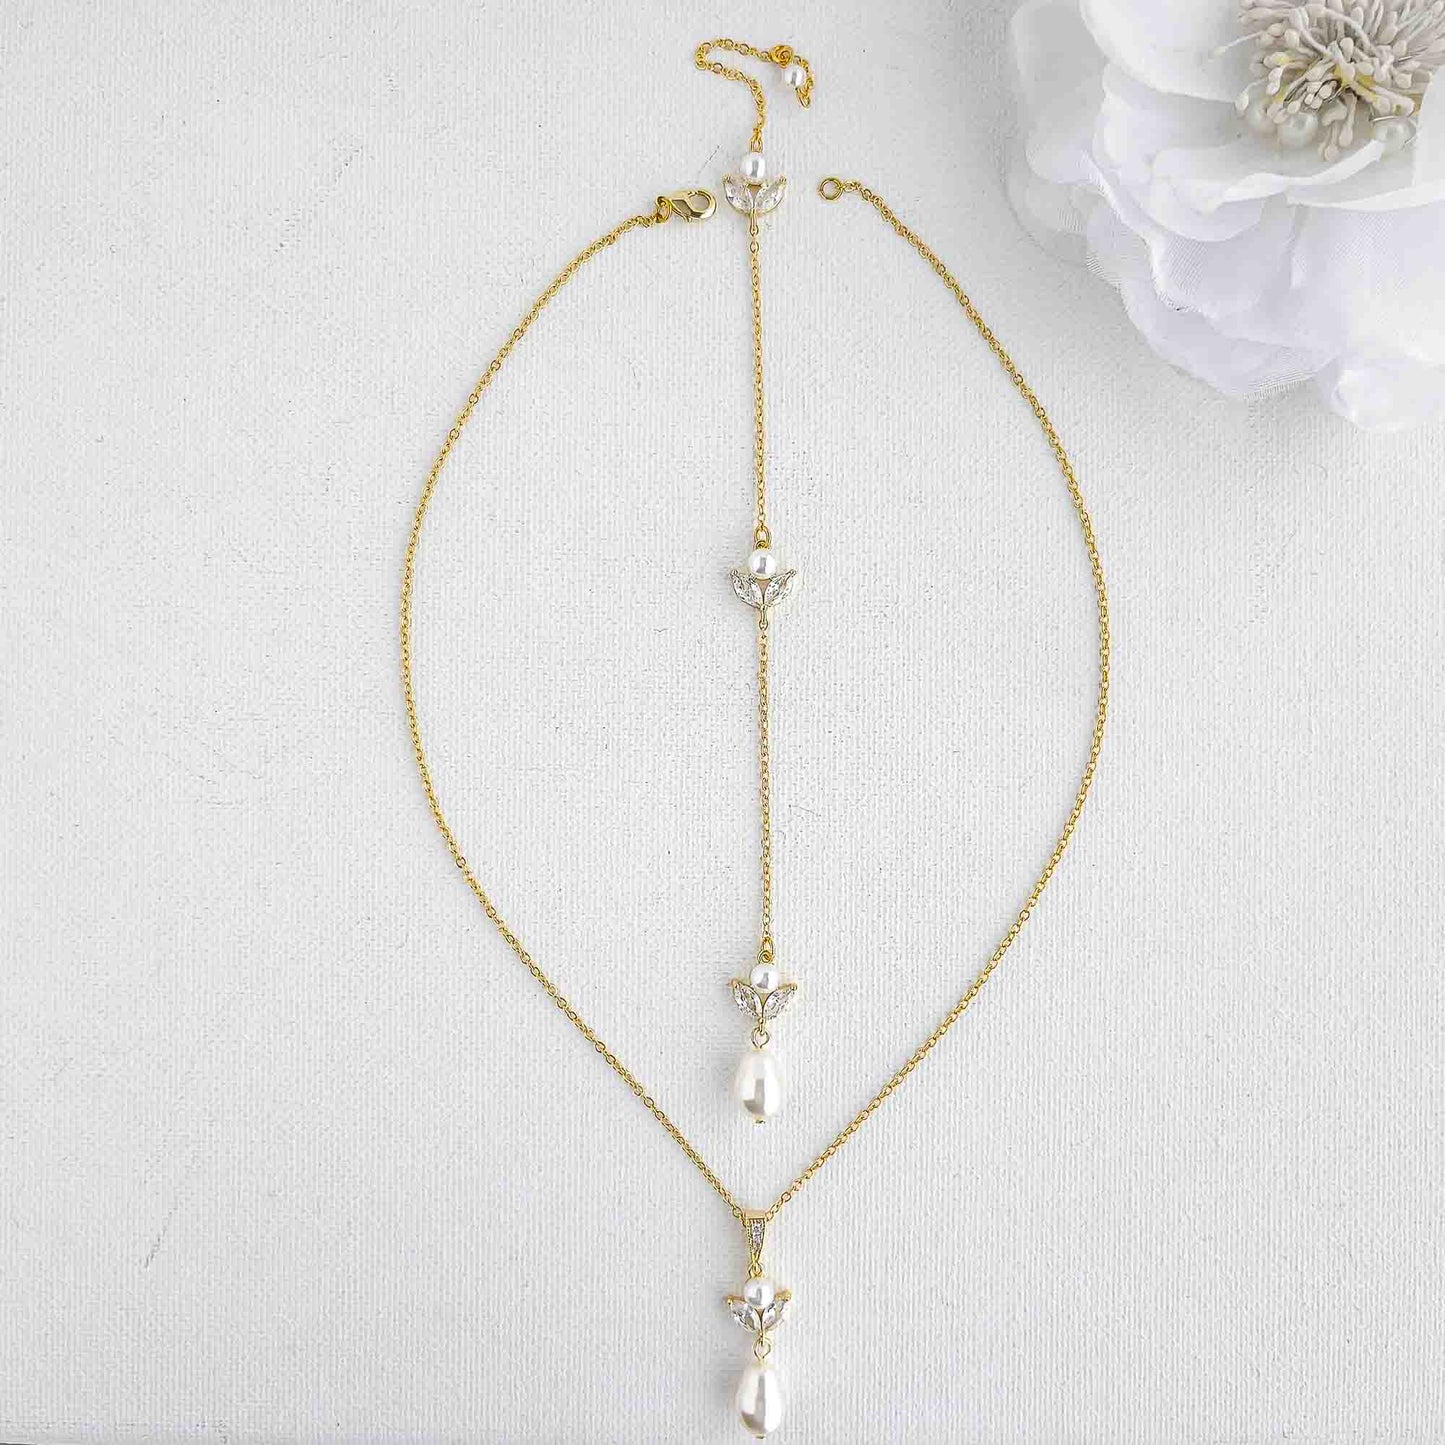 Simple Wedding Pearl Pendant Necklace with Backdrop in Gold-Leila